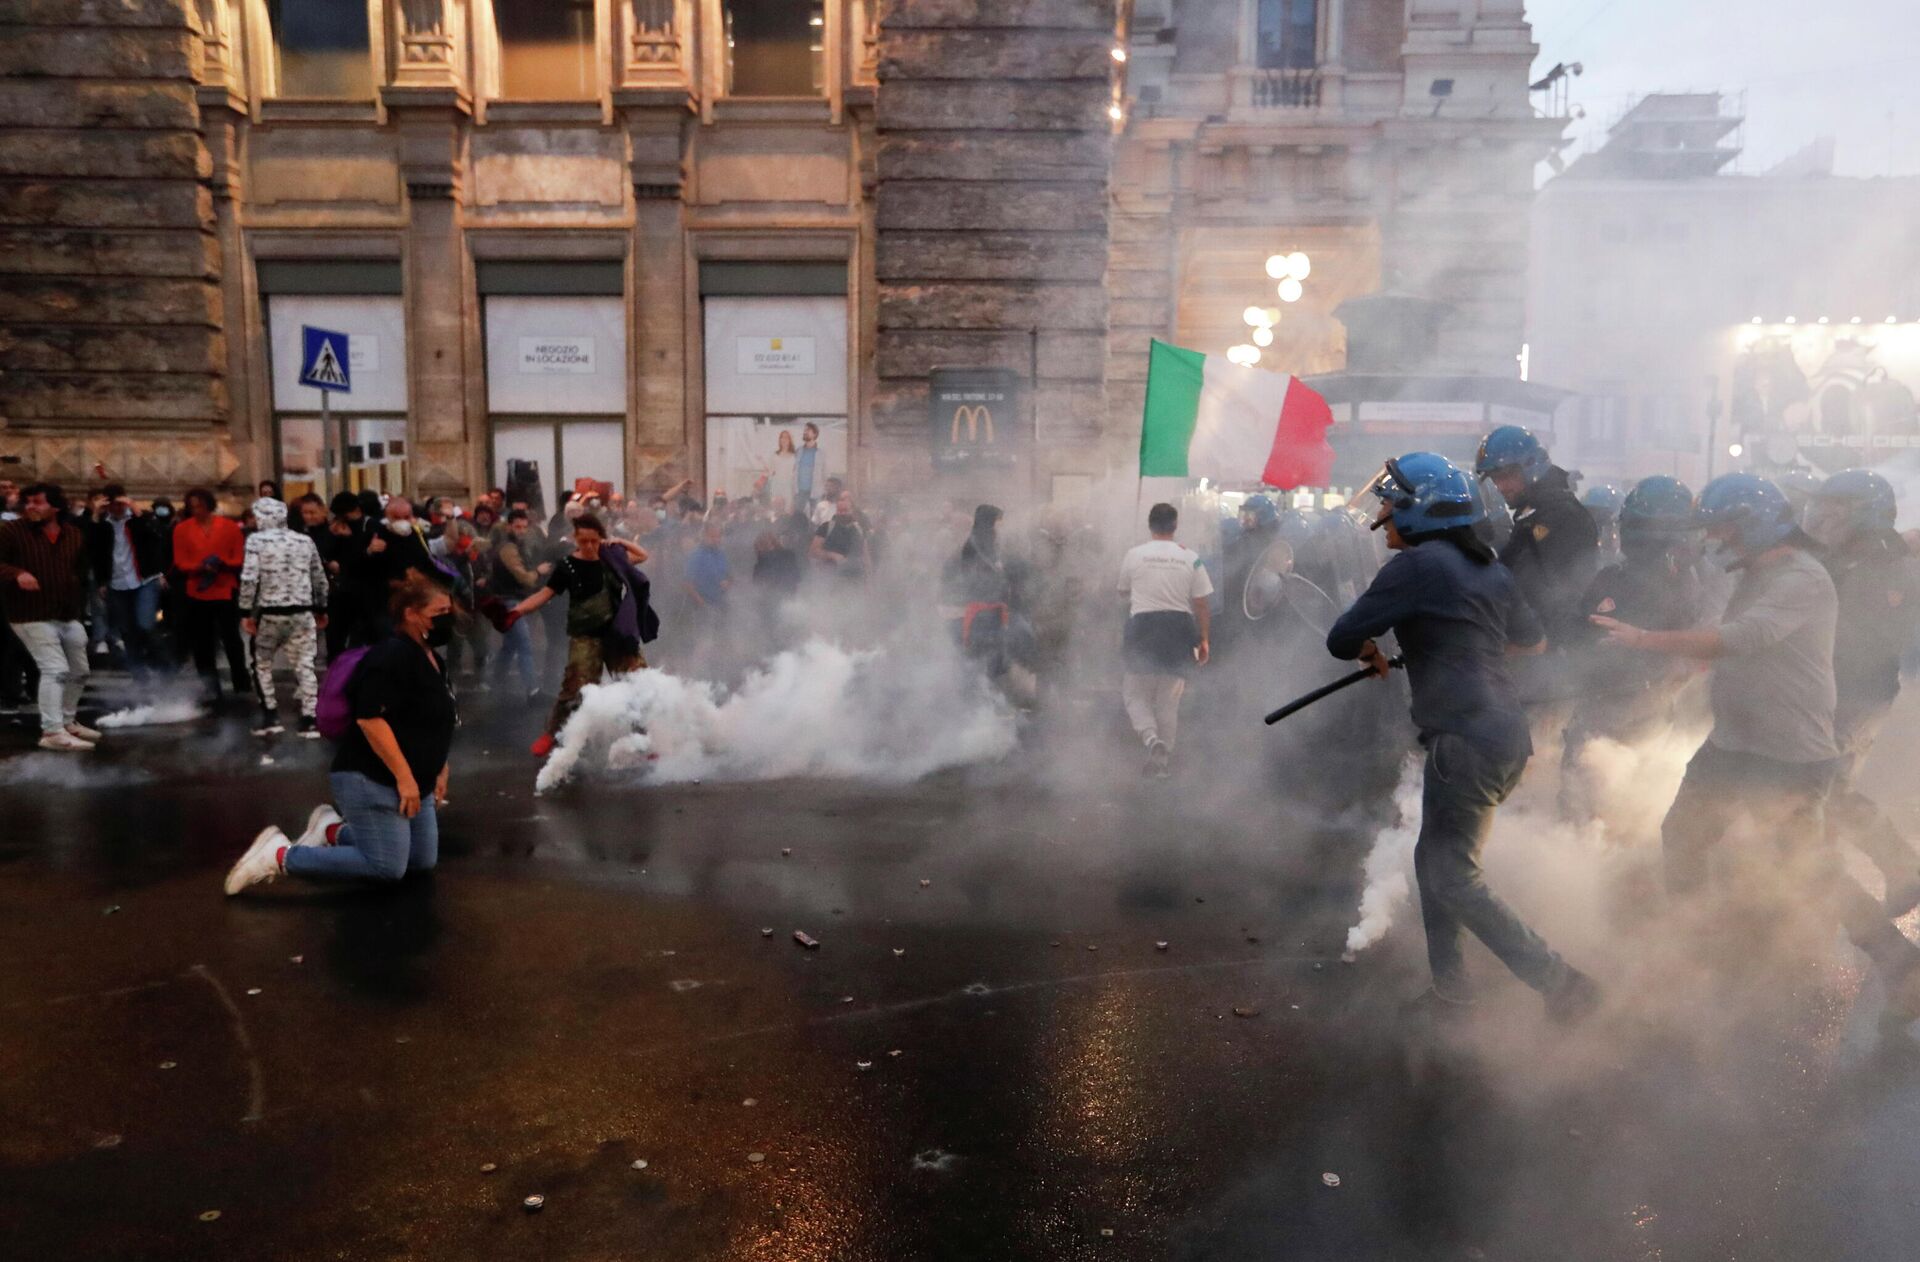 Demonstrators clash with police officers during a protest against the government's introduction of the Green Pass near Chigi Palace in Rome, Italy, October 9, 2021. - Sputnik International, 1920, 17.10.2021